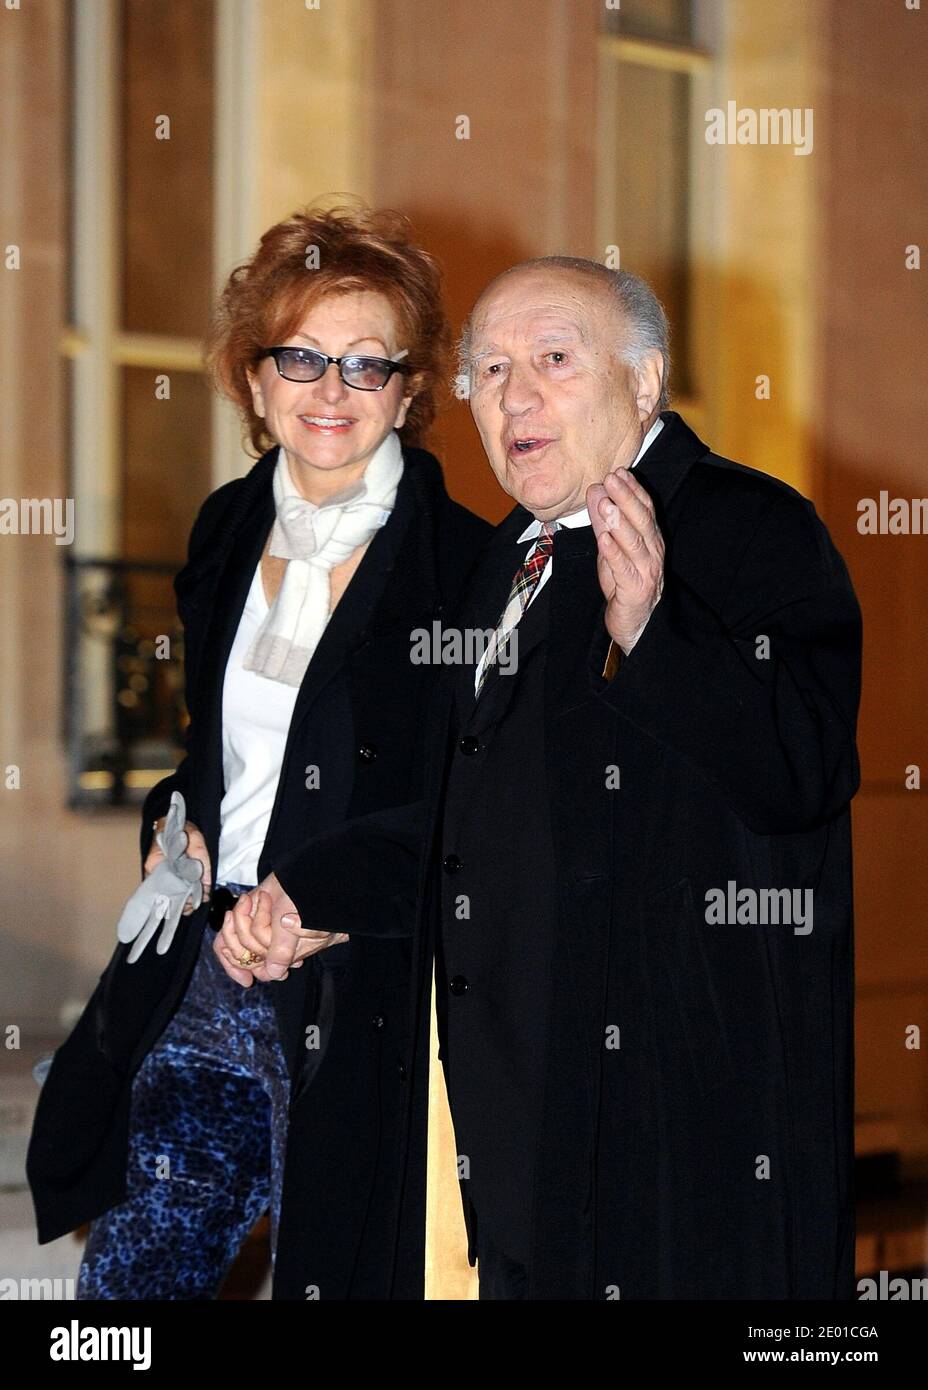 Michel Piccoli and his wife Ludivine Clerc are seen arriving at a medal  ceremony held at the Elysee Palace in Paris, France on November 26, 2013.  Photo by Mousse/ABACAPRESS.COM Stock Photo -